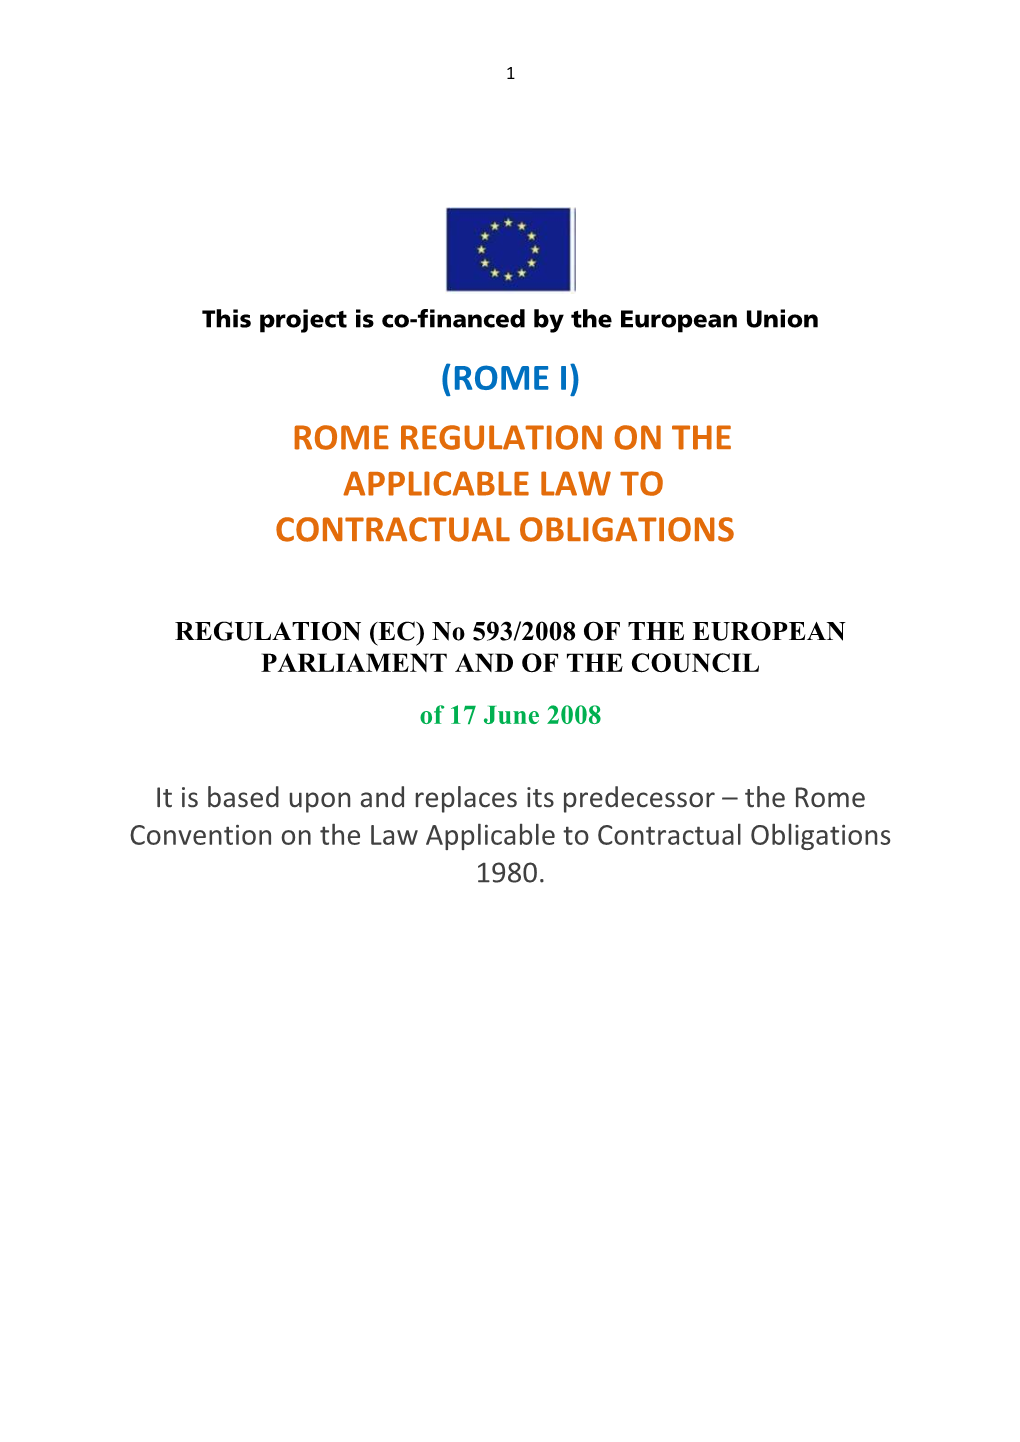 Rome Regulation on the Applicable Law to Contractual Obligations